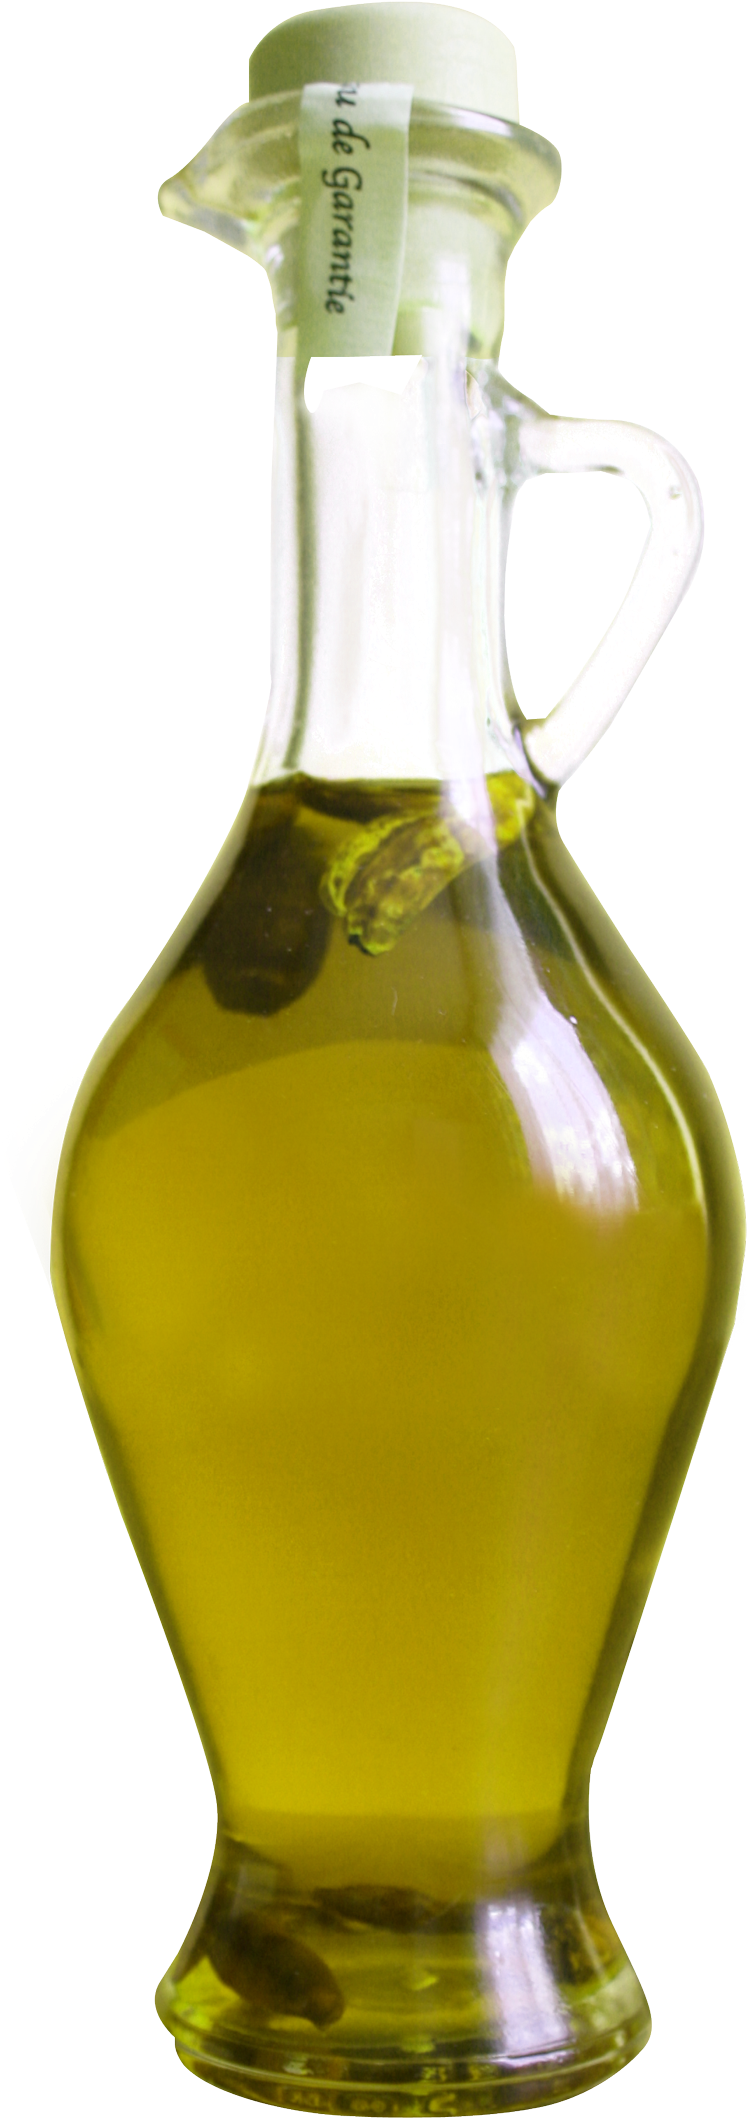 A Glass Jug With A Yellow Liquid